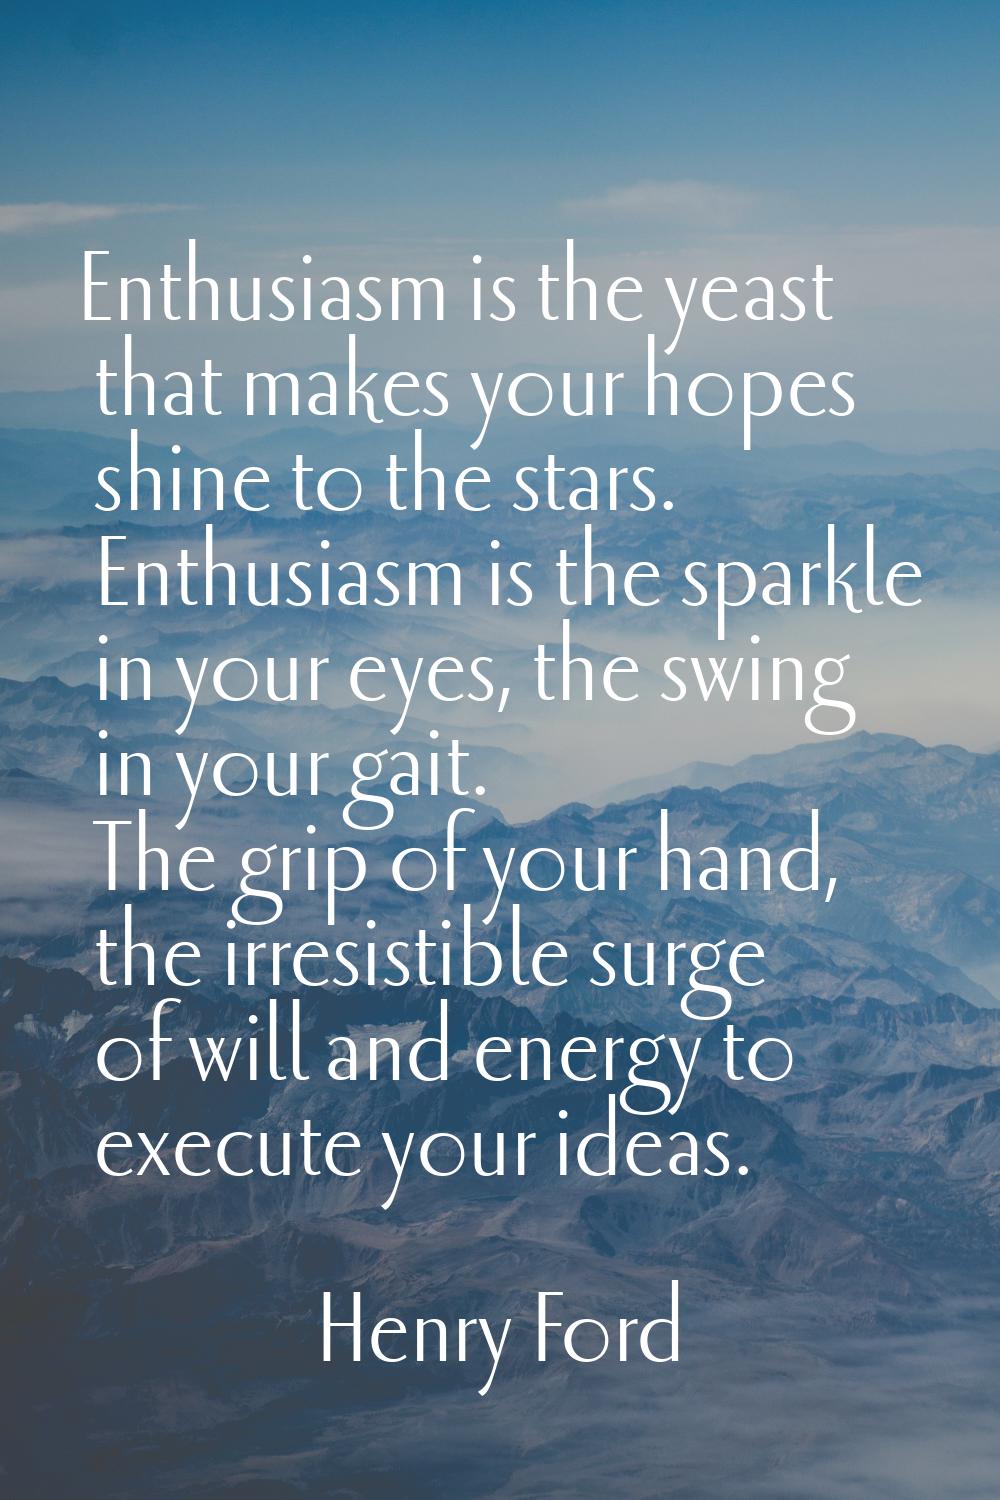 Enthusiasm is the yeast that makes your hopes shine to the stars. Enthusiasm is the sparkle in your